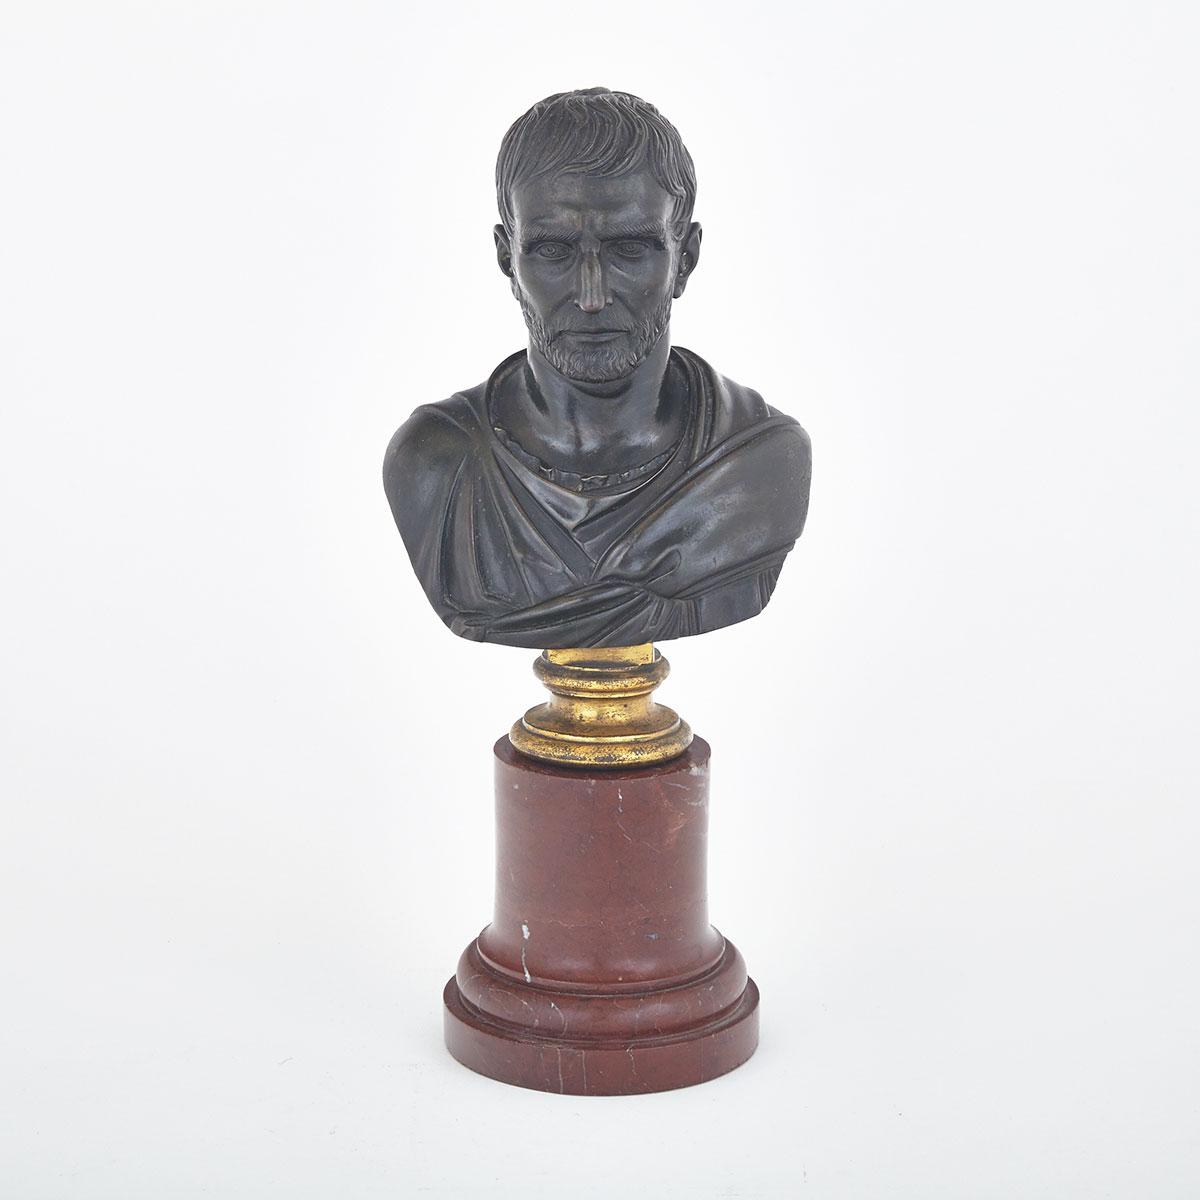 Italian Patinated and Gilt Bronze Model of the Capitoline Bust of Brutus, mid 19th century